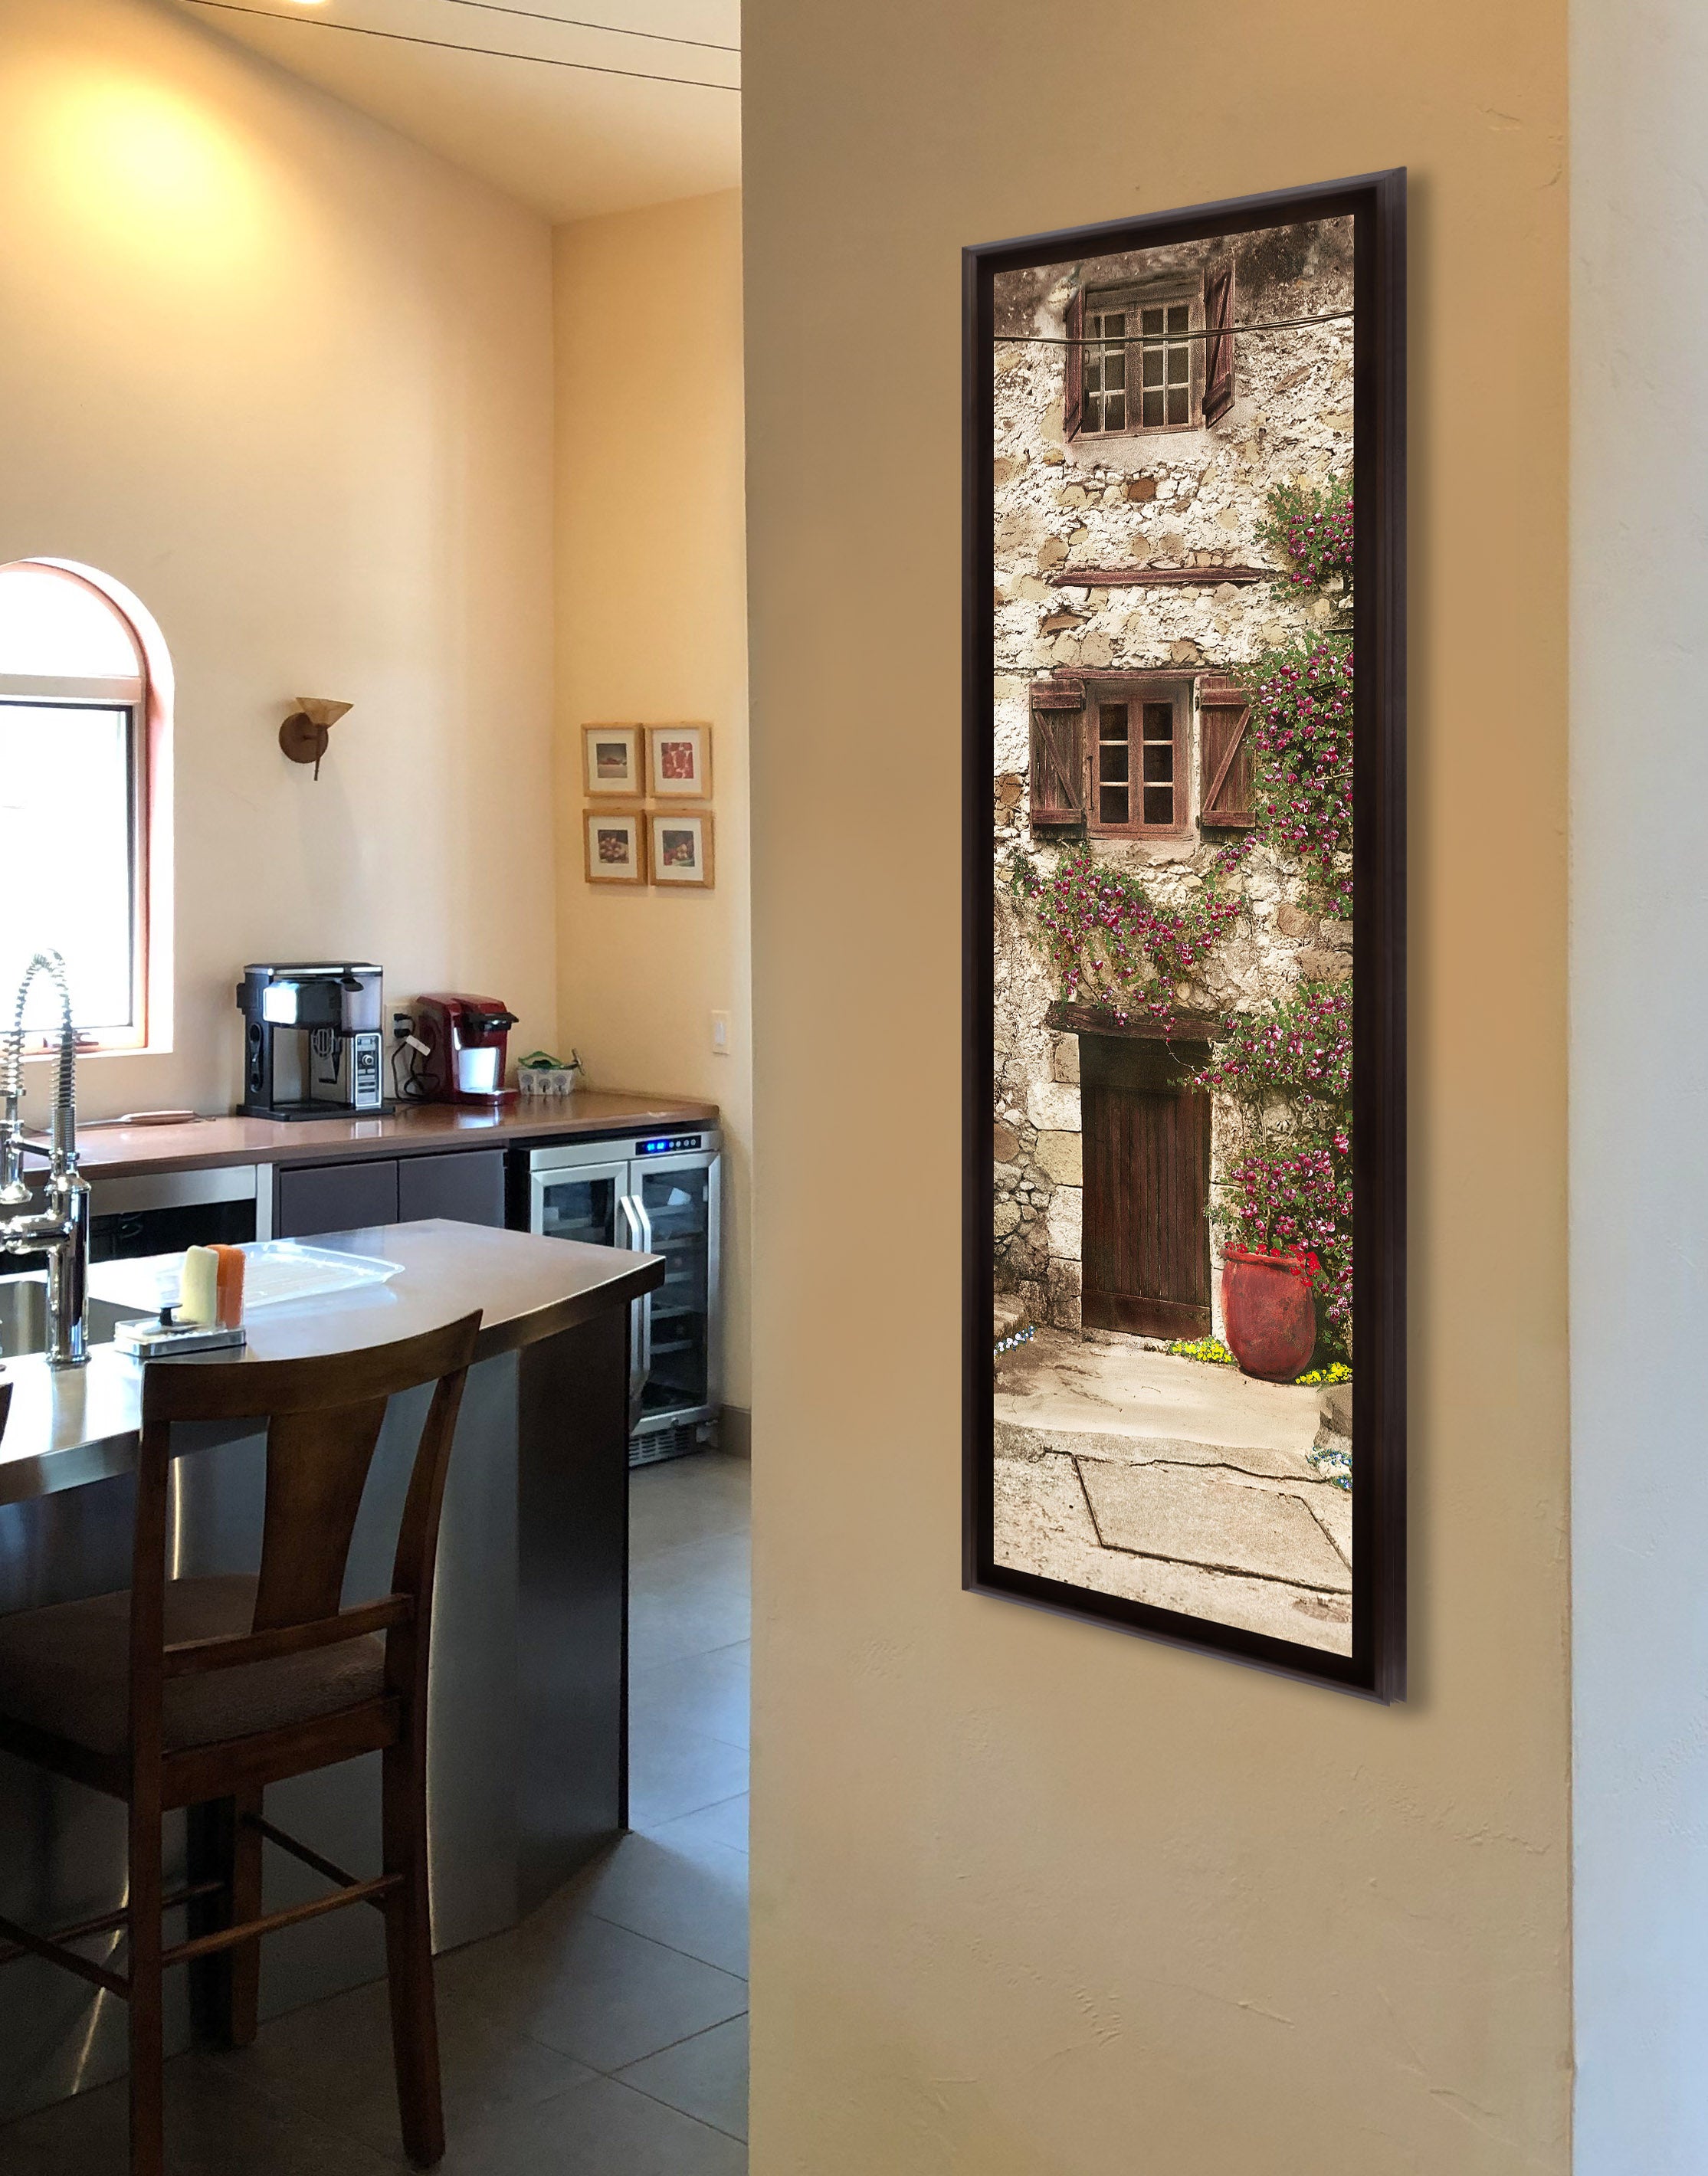 "End of the Alley" TALL SKINNY CANVAS FRAMED PRINT "15 X 45"